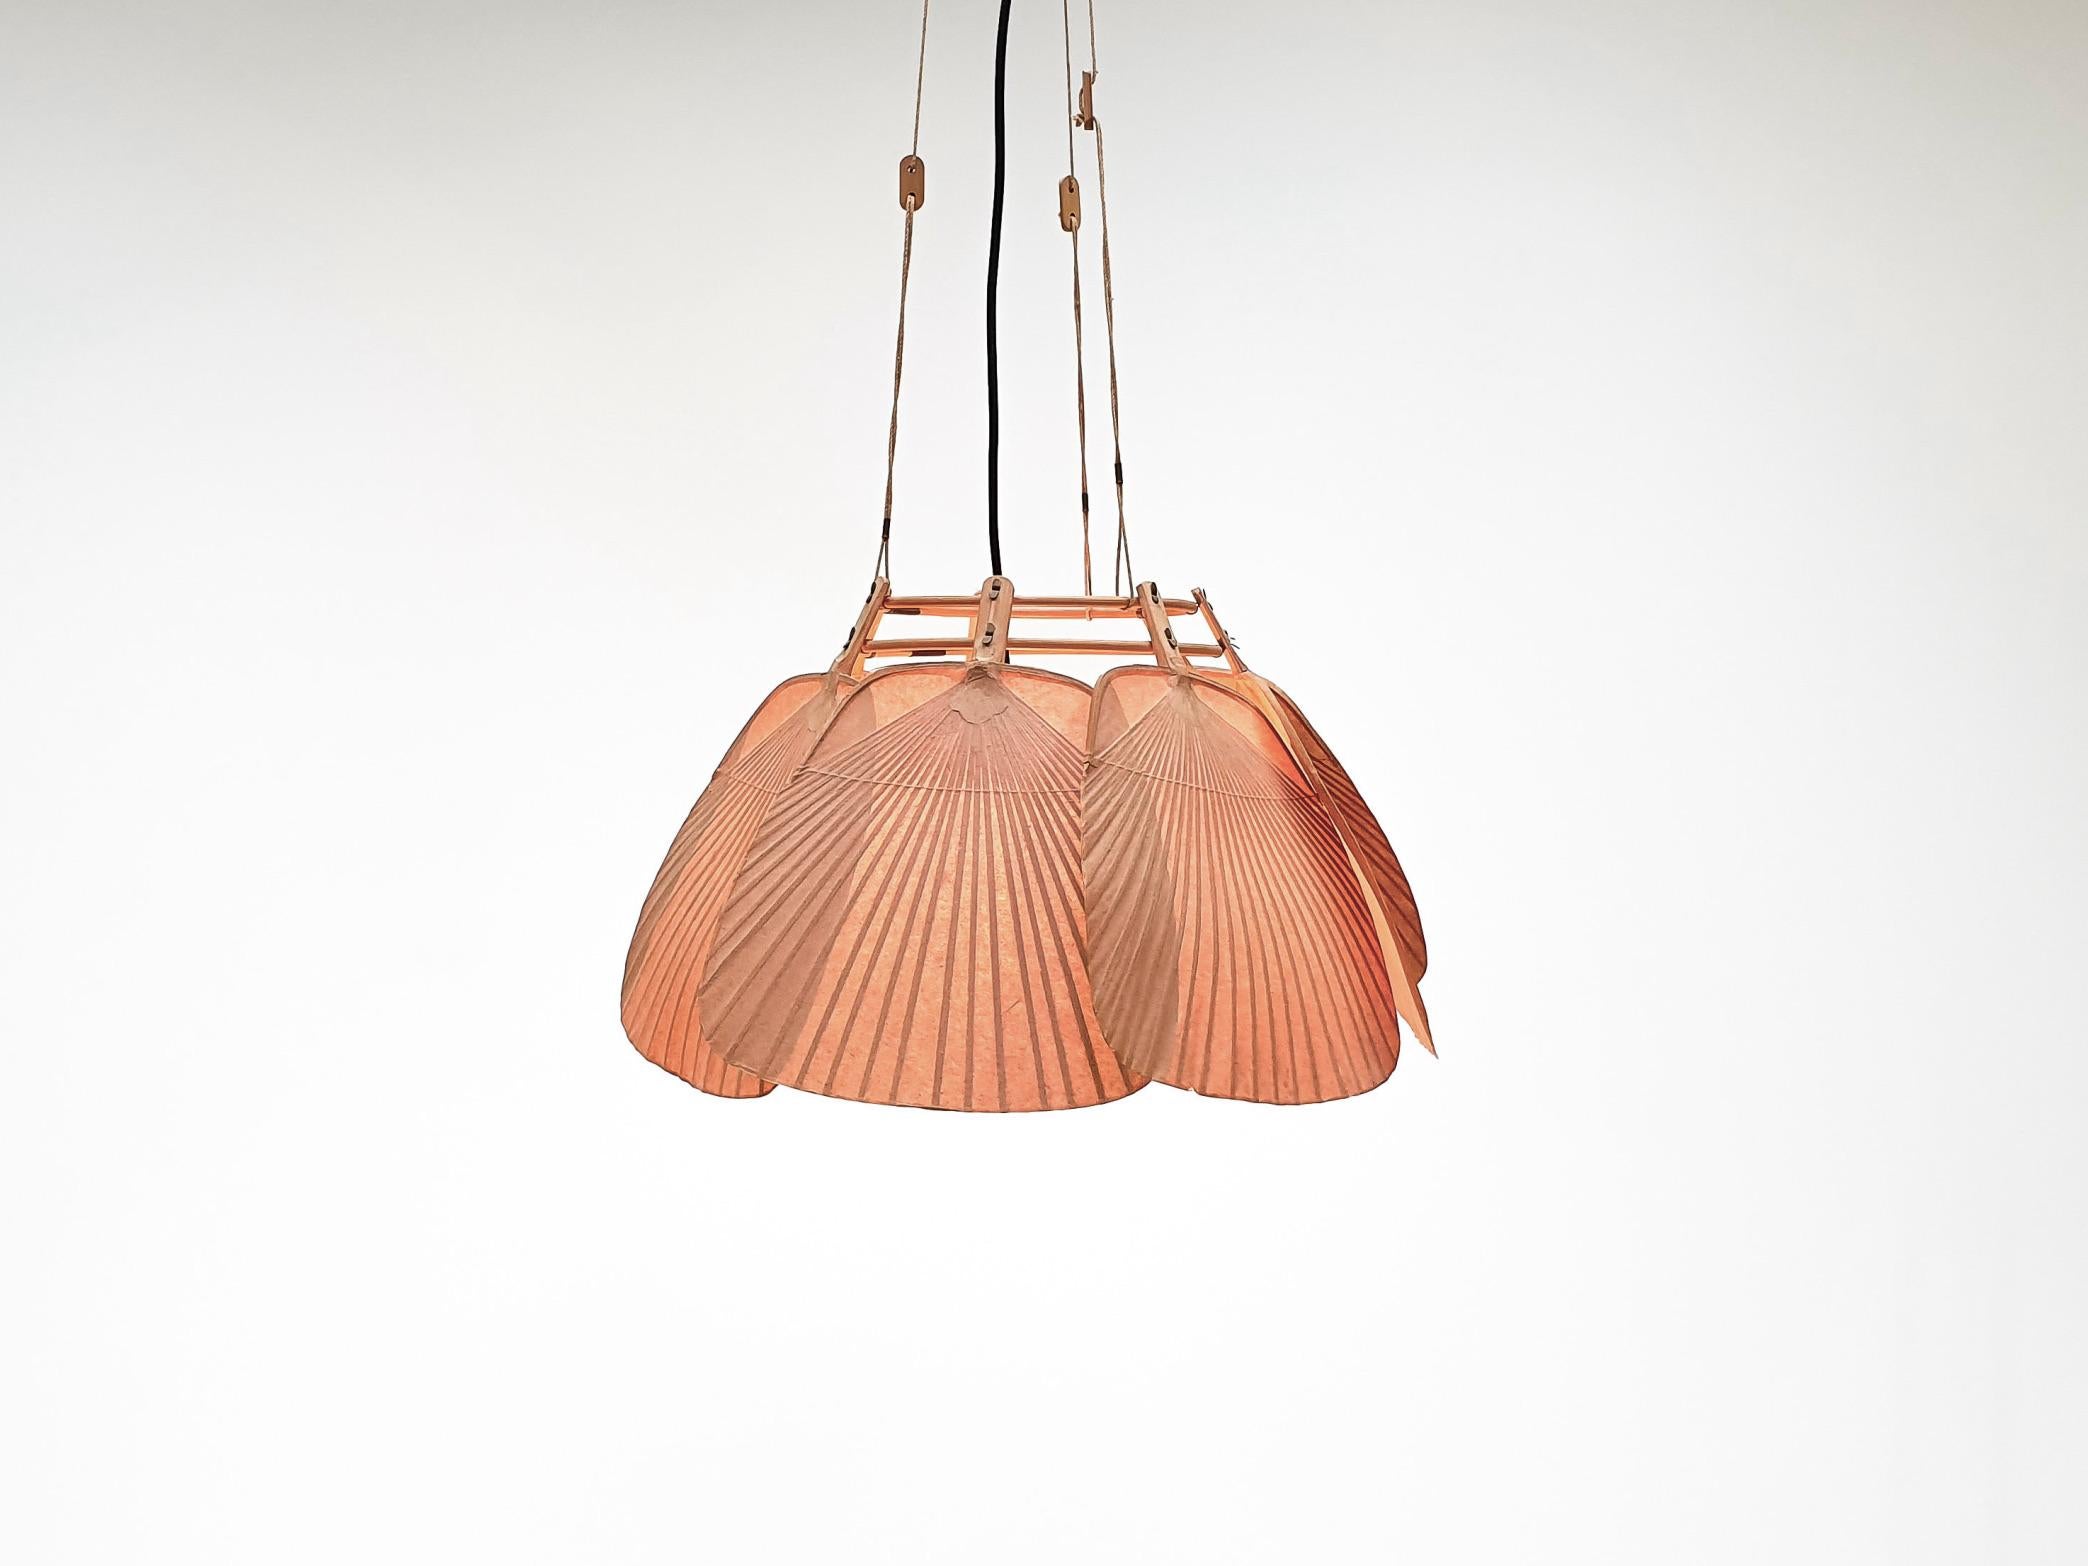 Rare Uchiwa Ju-Yon chandelier in very good condition. 

Designed by Ingo Maurer for M design, Germany. 

This chandelier is handmade from bamboo and Japanese rice paper. 

The lamp consists of seven fans hanging from a bamboo frame. 

When